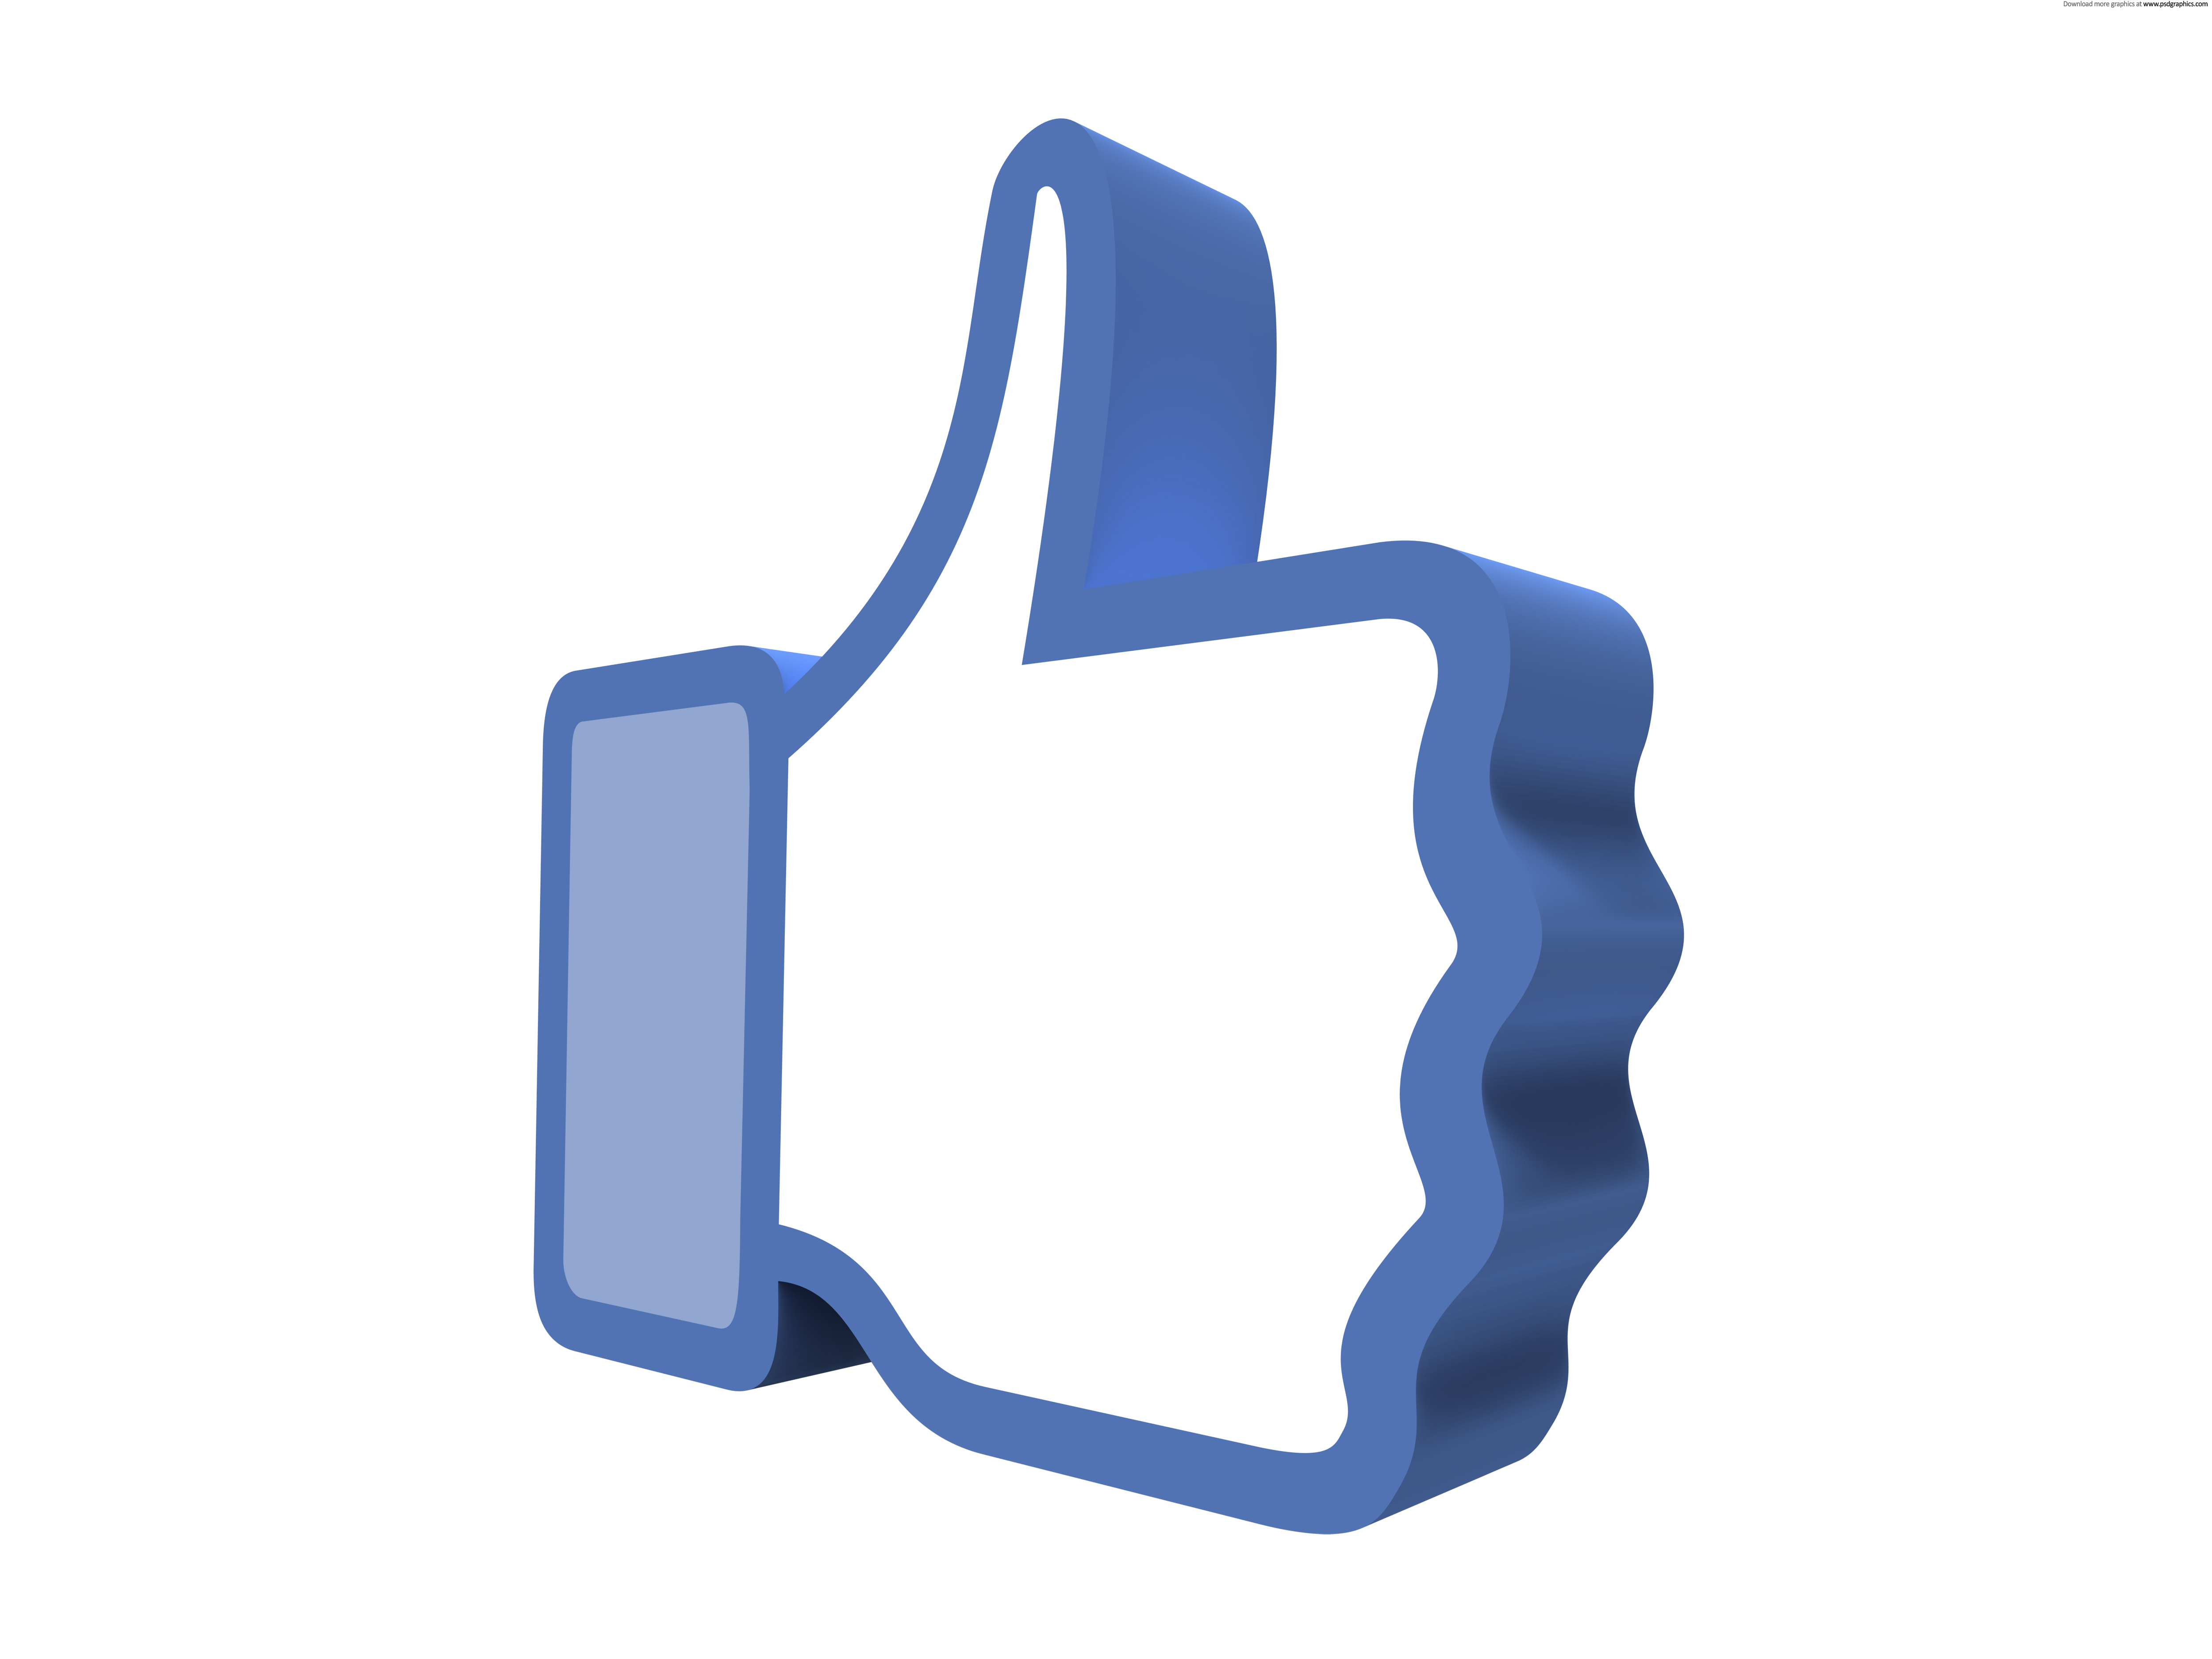 Facebook Gets Sued over Like Button